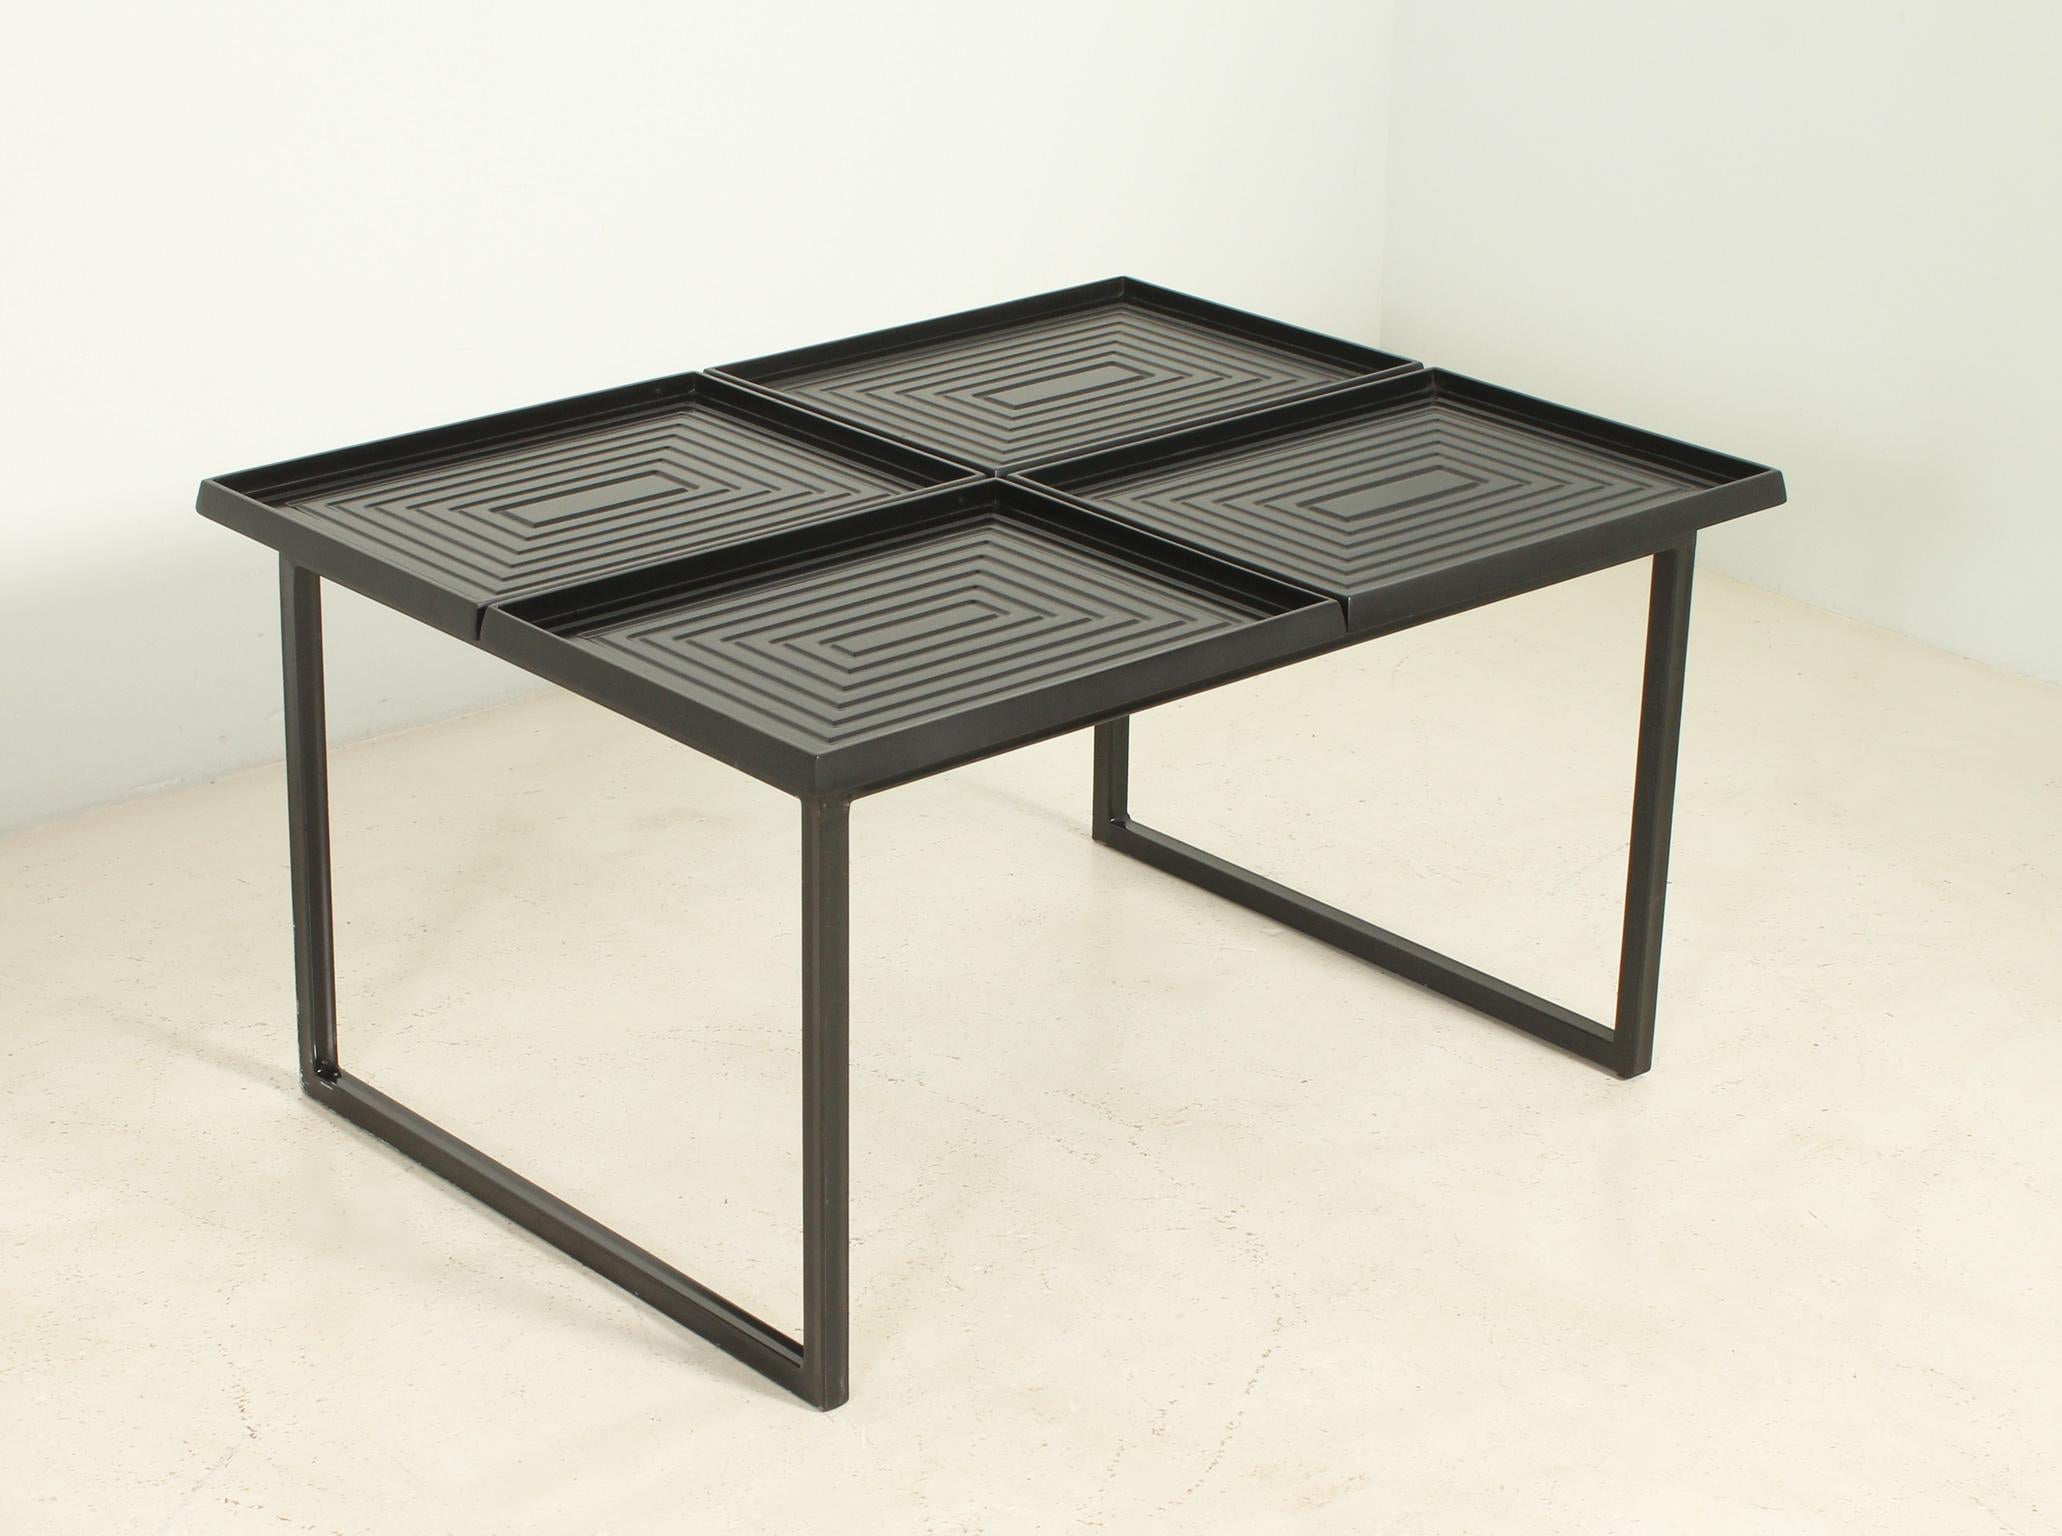 Rare coffee table from 1980's composed by four loose trays in lacquered wood with geometric carved relief on a black lacquered metal base.